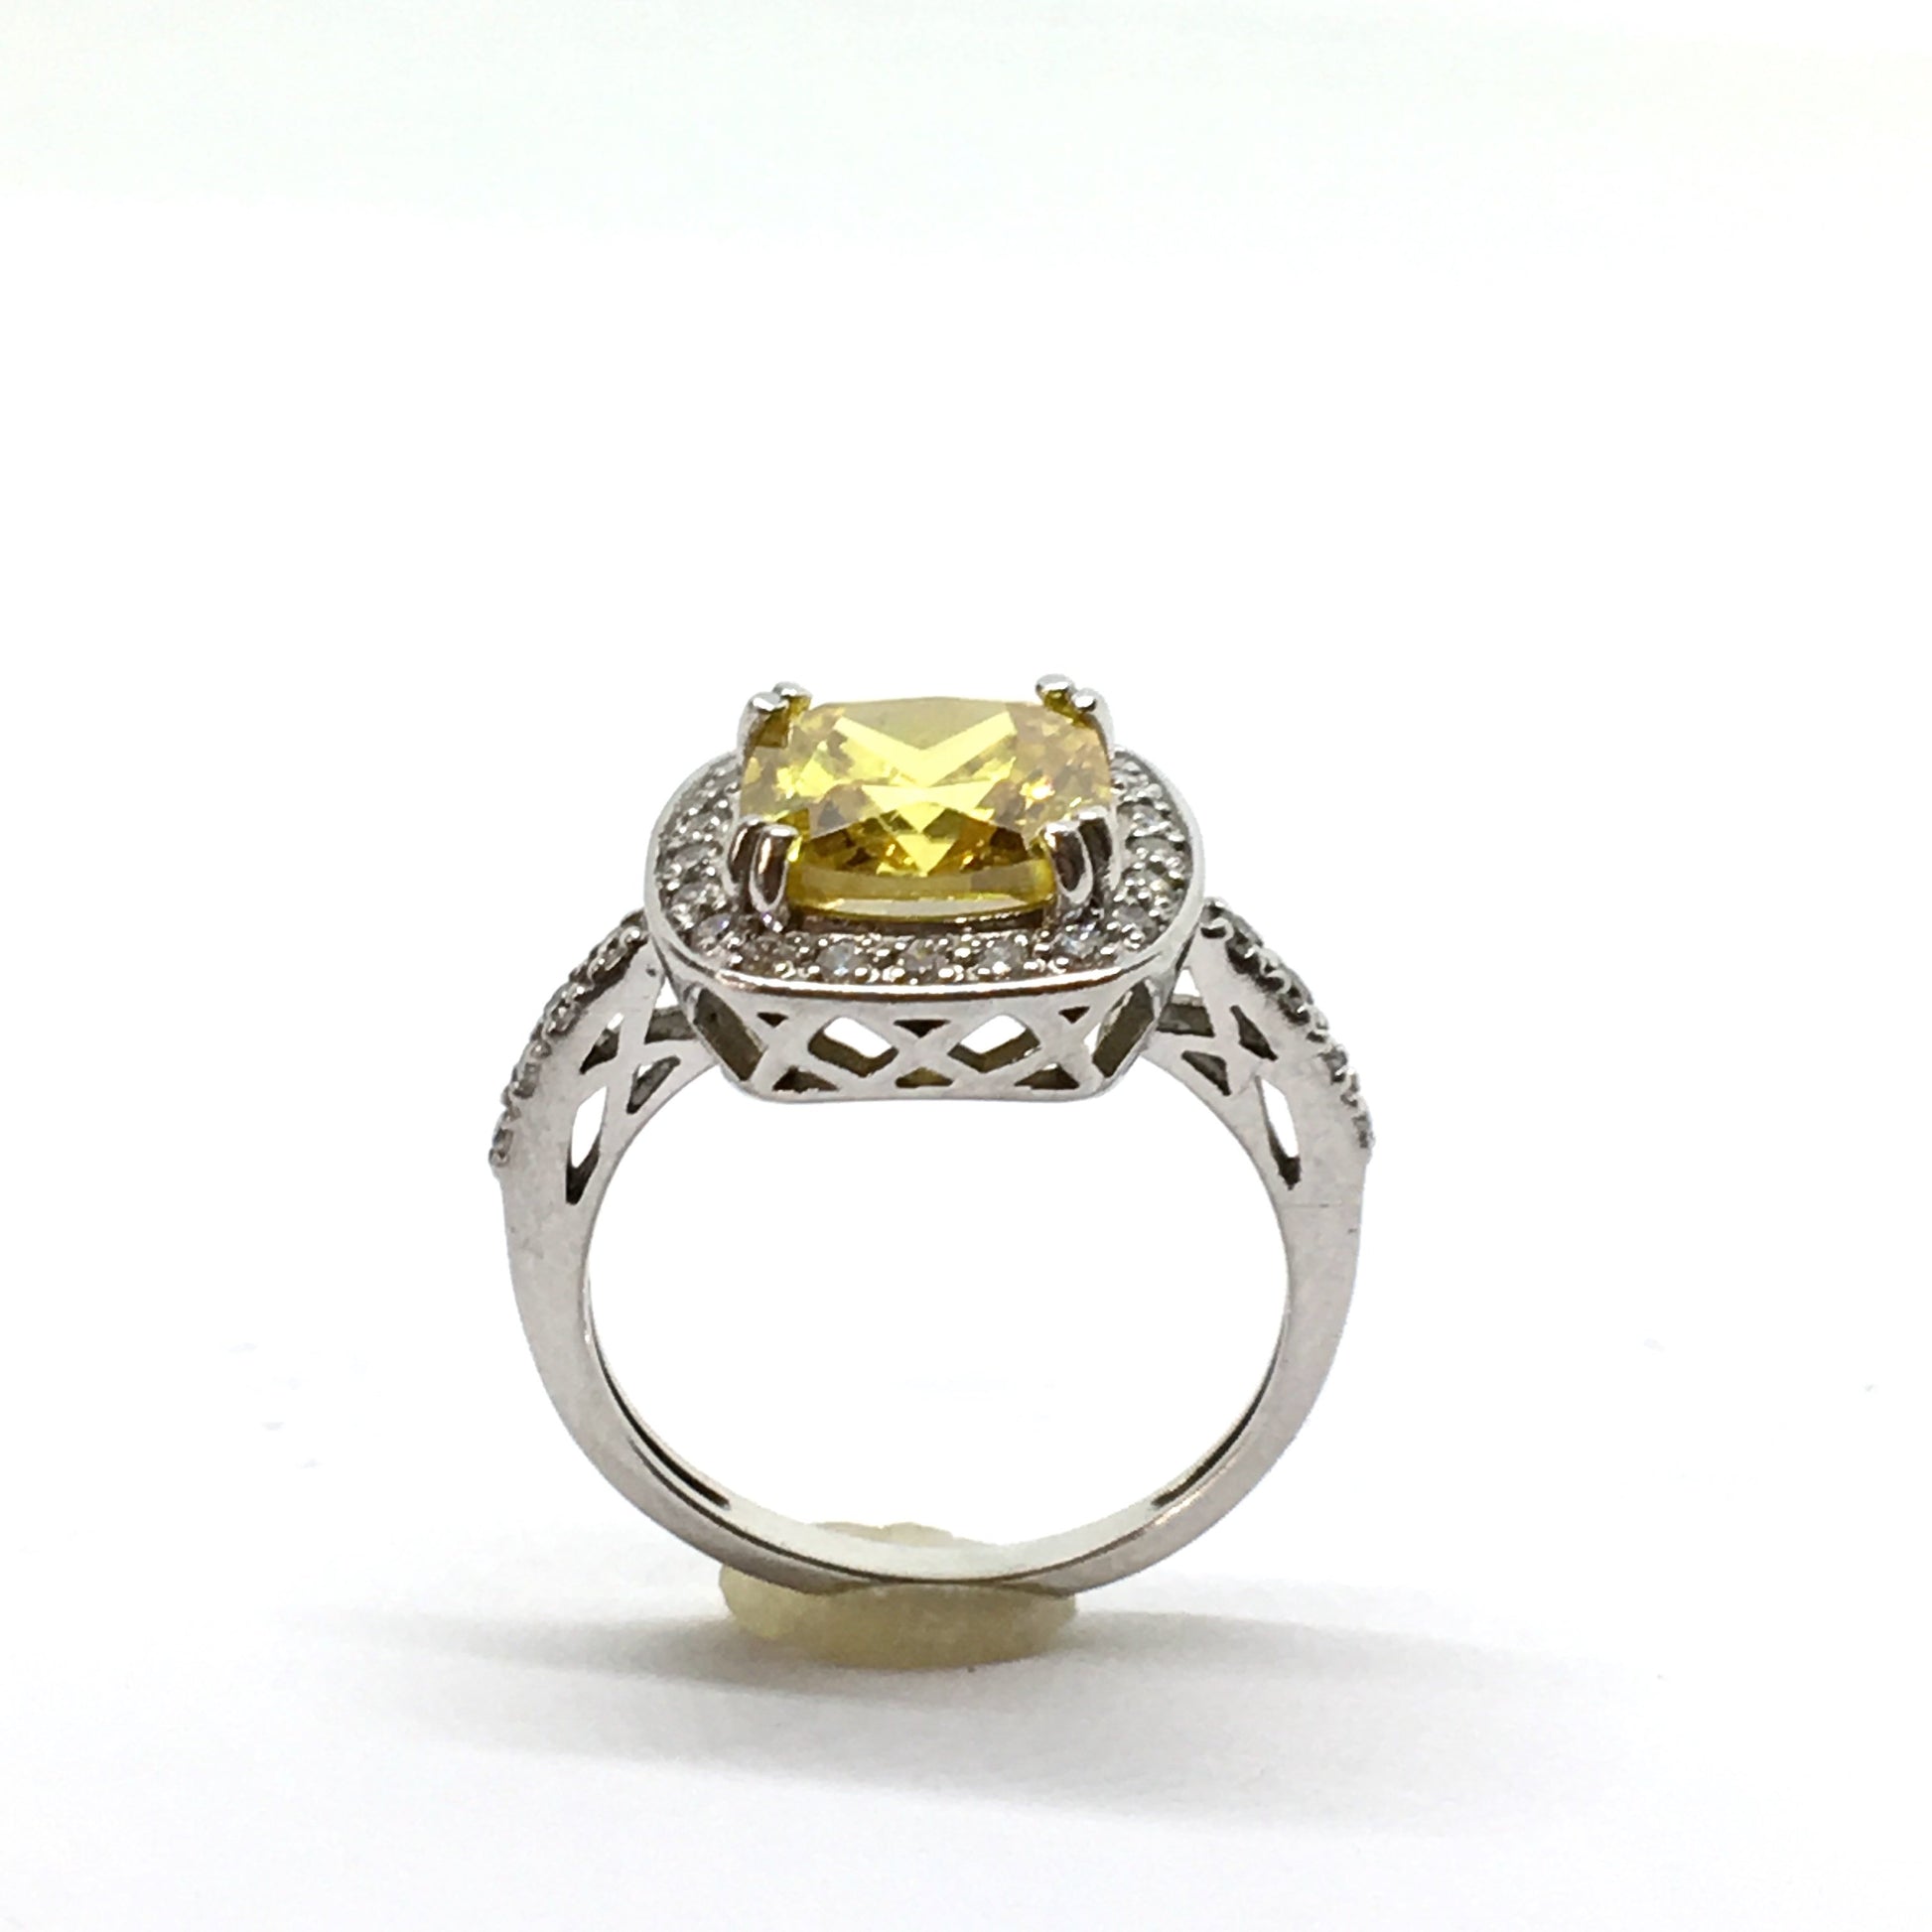 Jewelry - Estate Sterling Silver Shimmery Citrine Yellow Cz Halo Ring